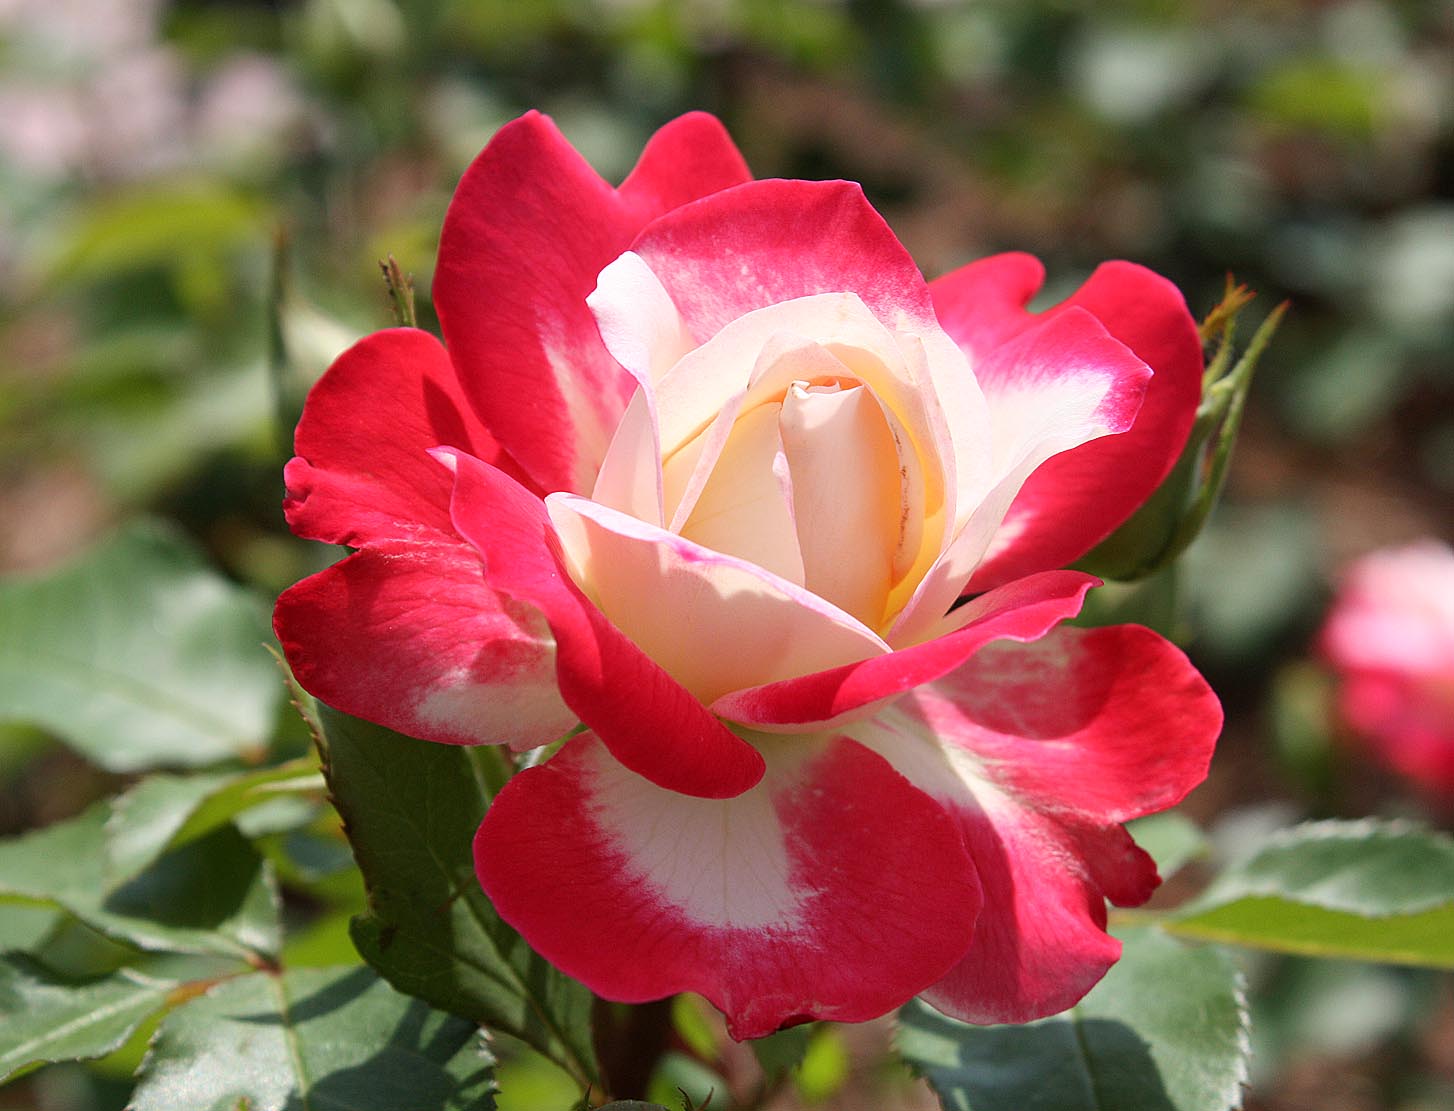 Southern Lagniappe: An Old-Fashioned Rose Garden